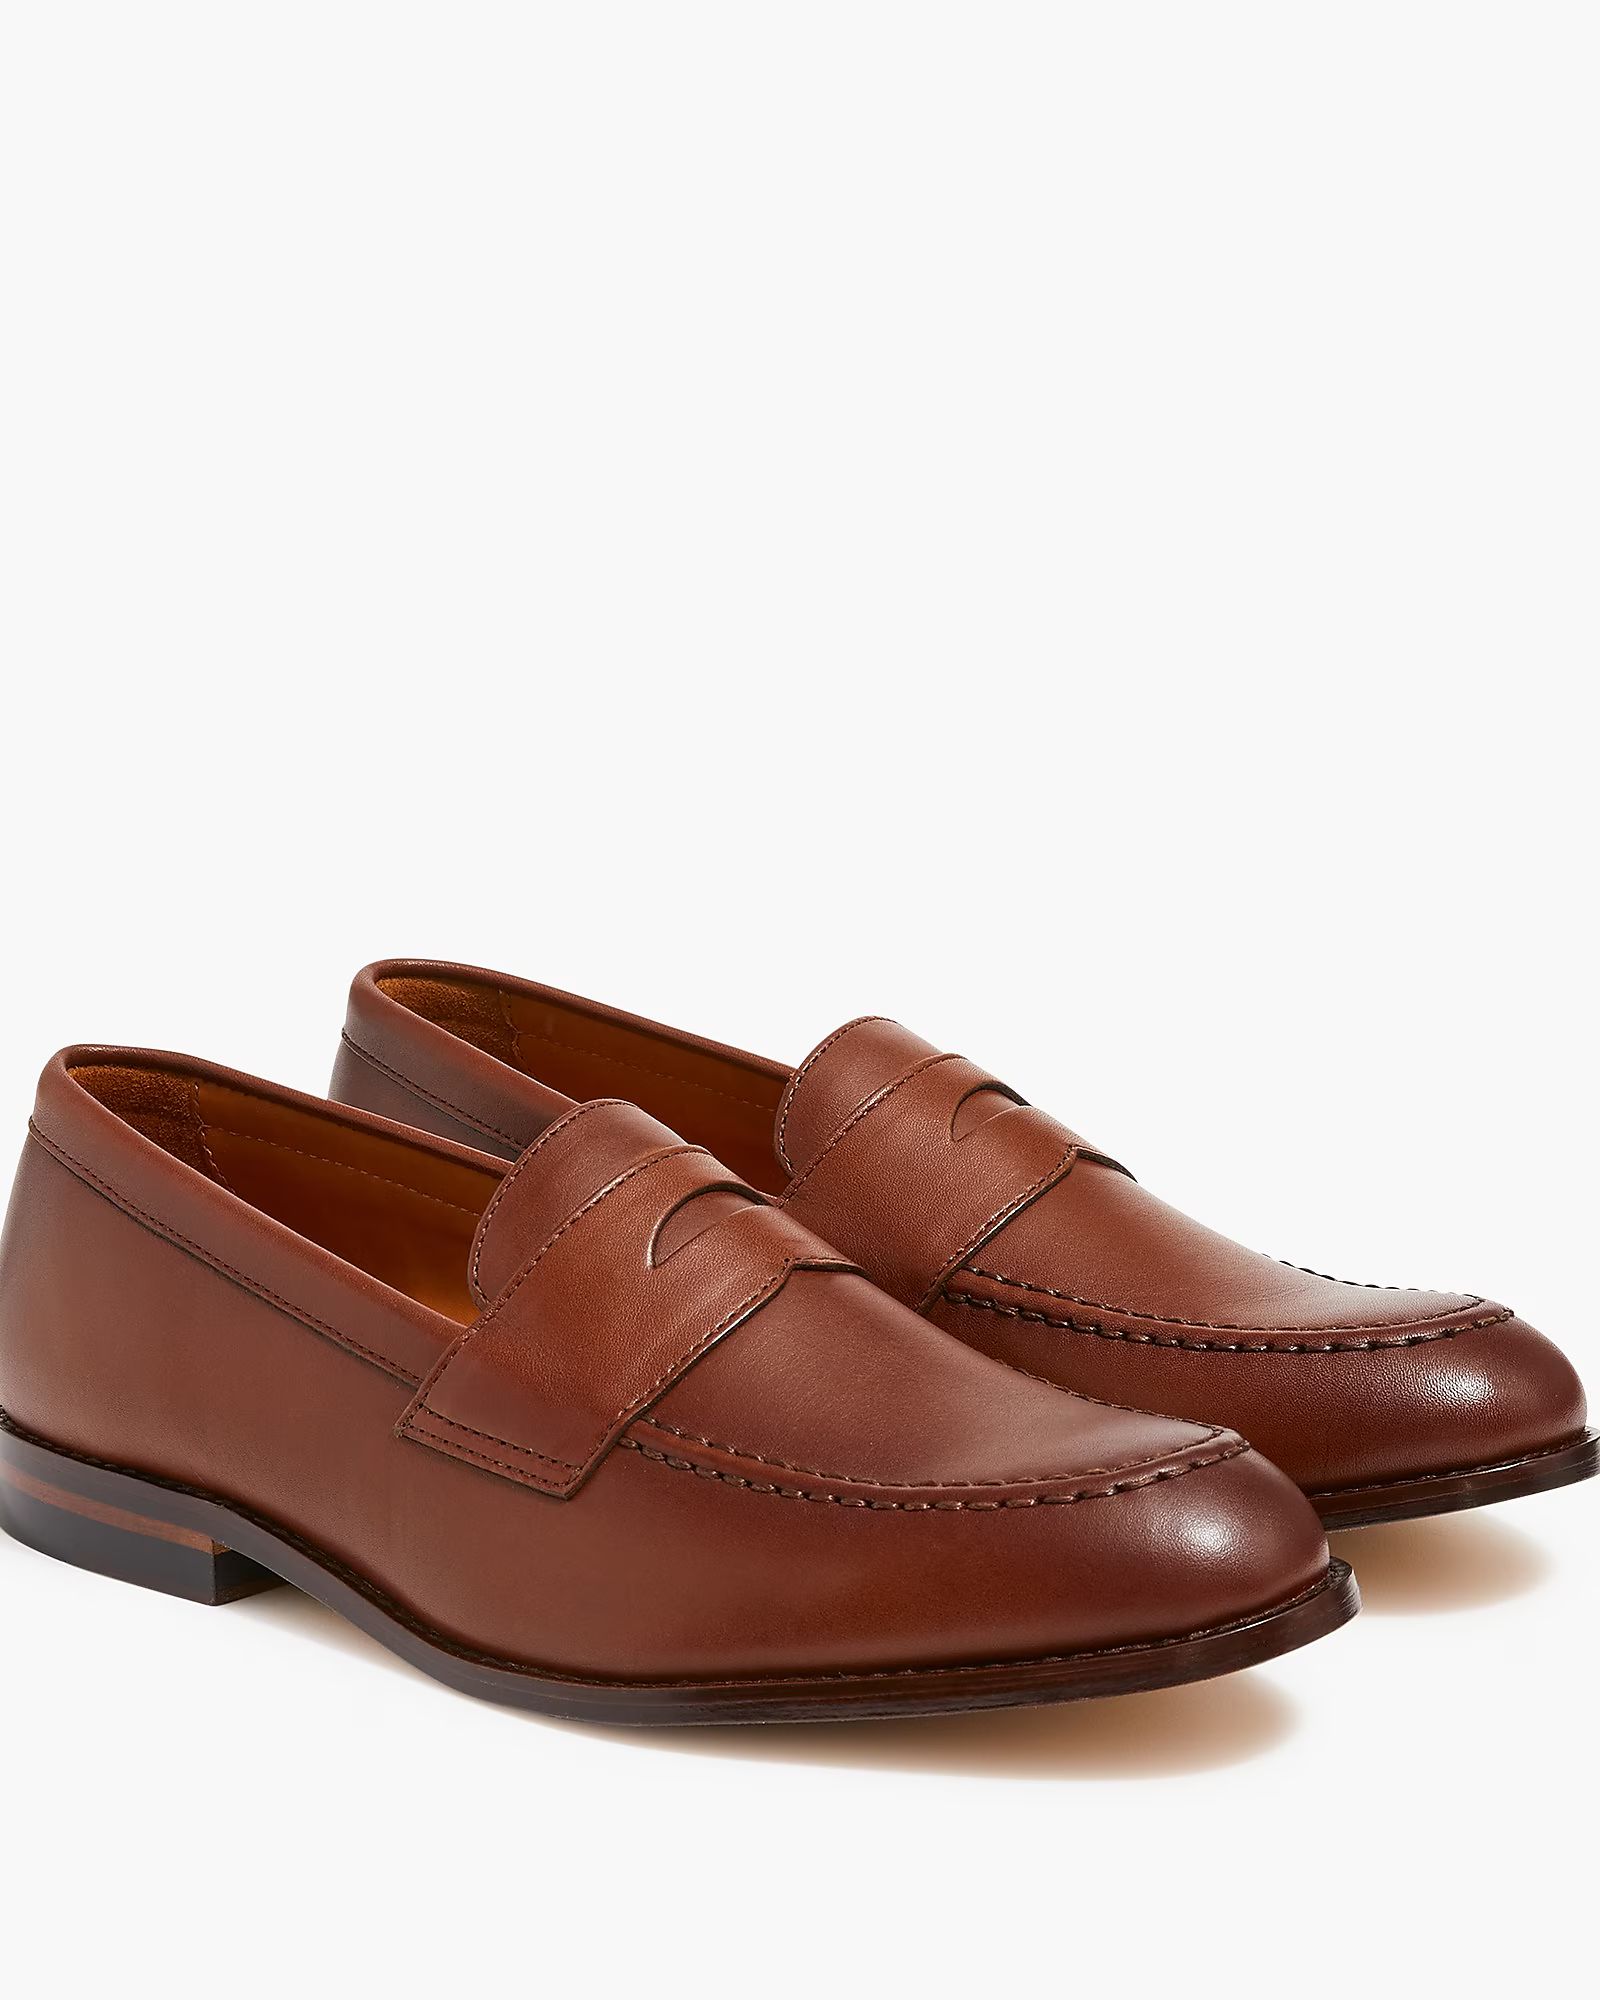 Classic penny loafers | J.Crew Factory